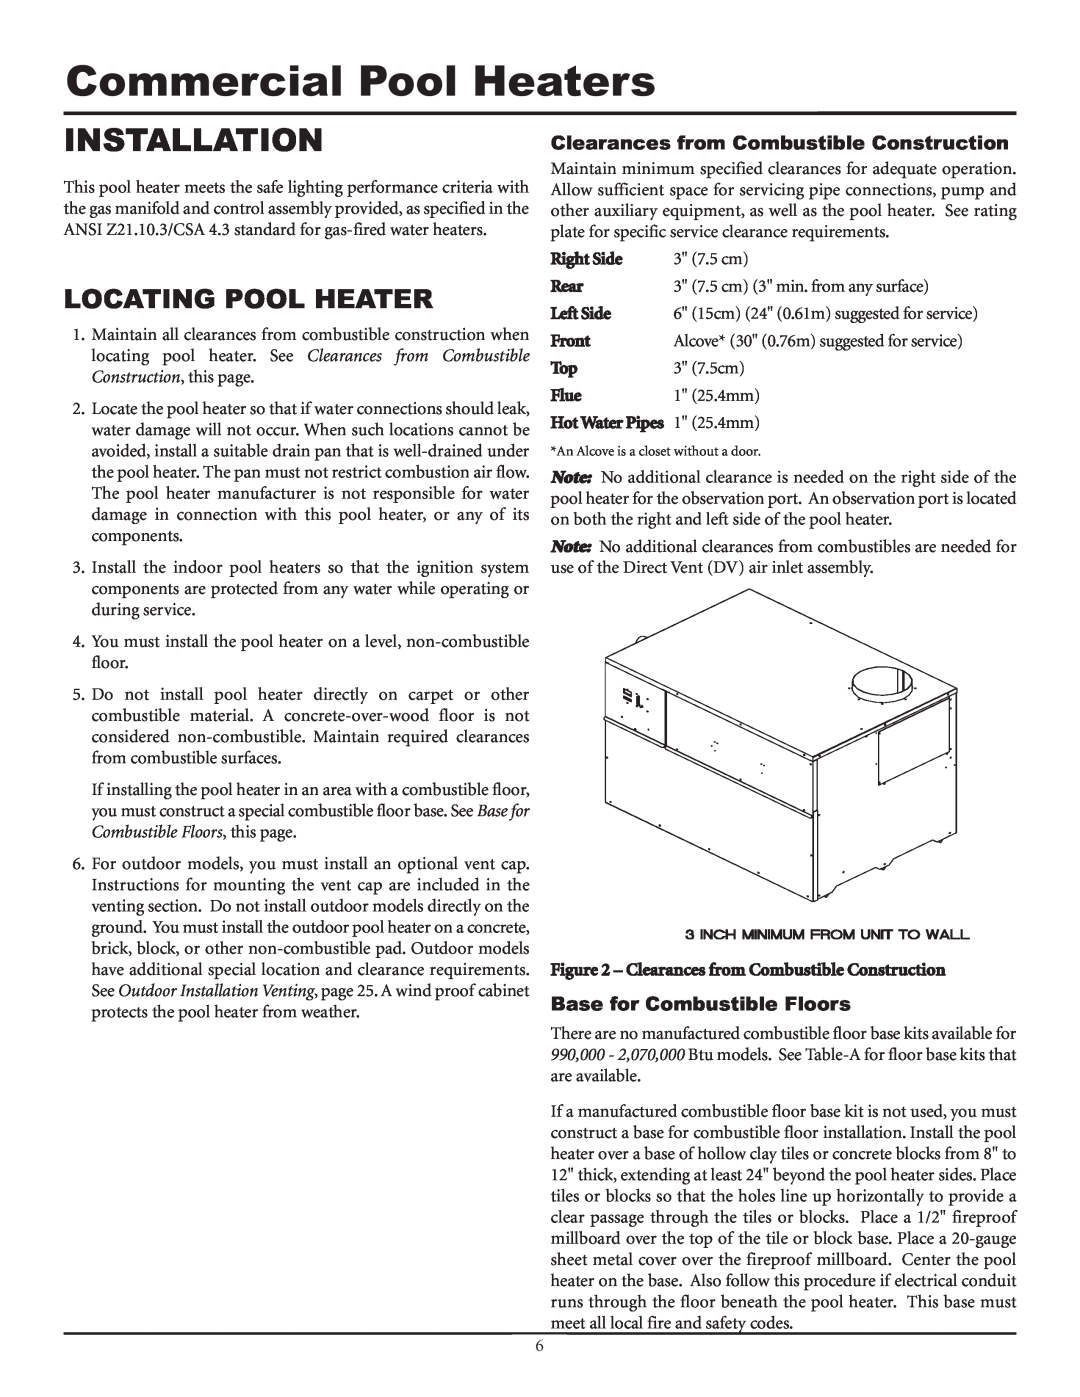 Lochinvar F0600187510 service manual Installation, Clearances from Combustible Construction, Base for Combustible Floors 